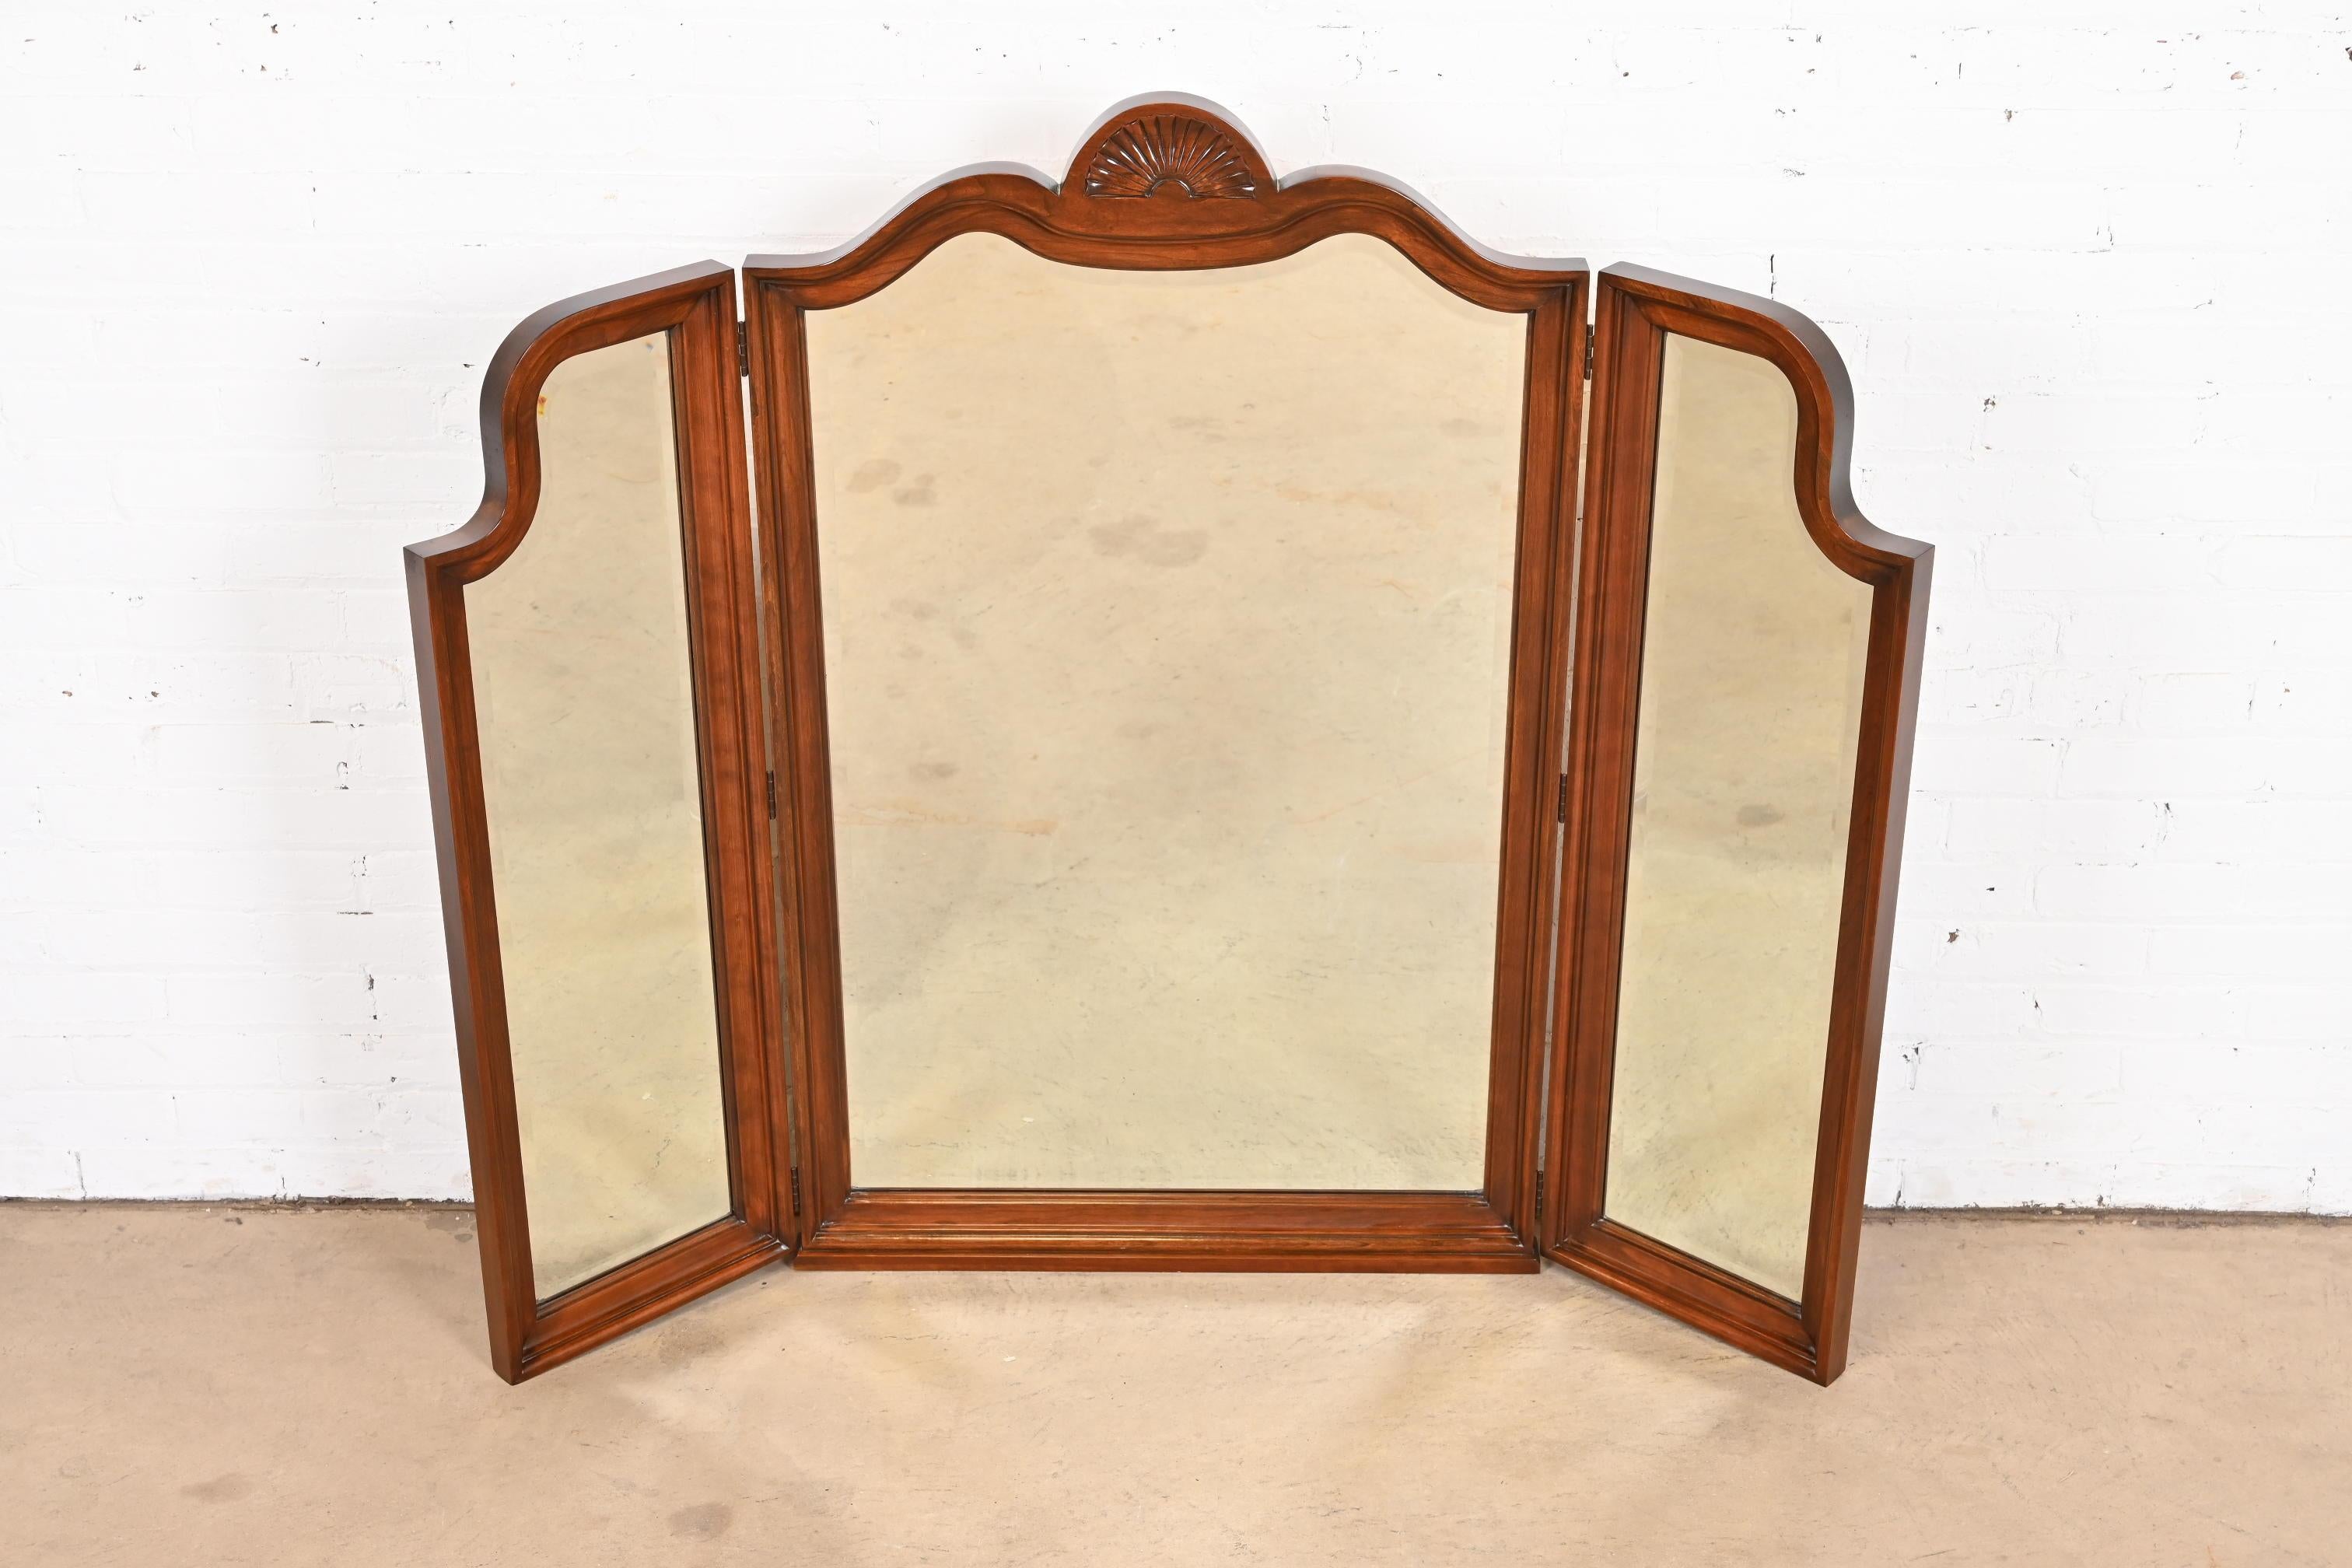 A gorgeous Georgian or Chippendale style carved cherry wood framed tri-fold triple mirror

By Harden Furniture

USA, Late 20th Century

Measures: 56